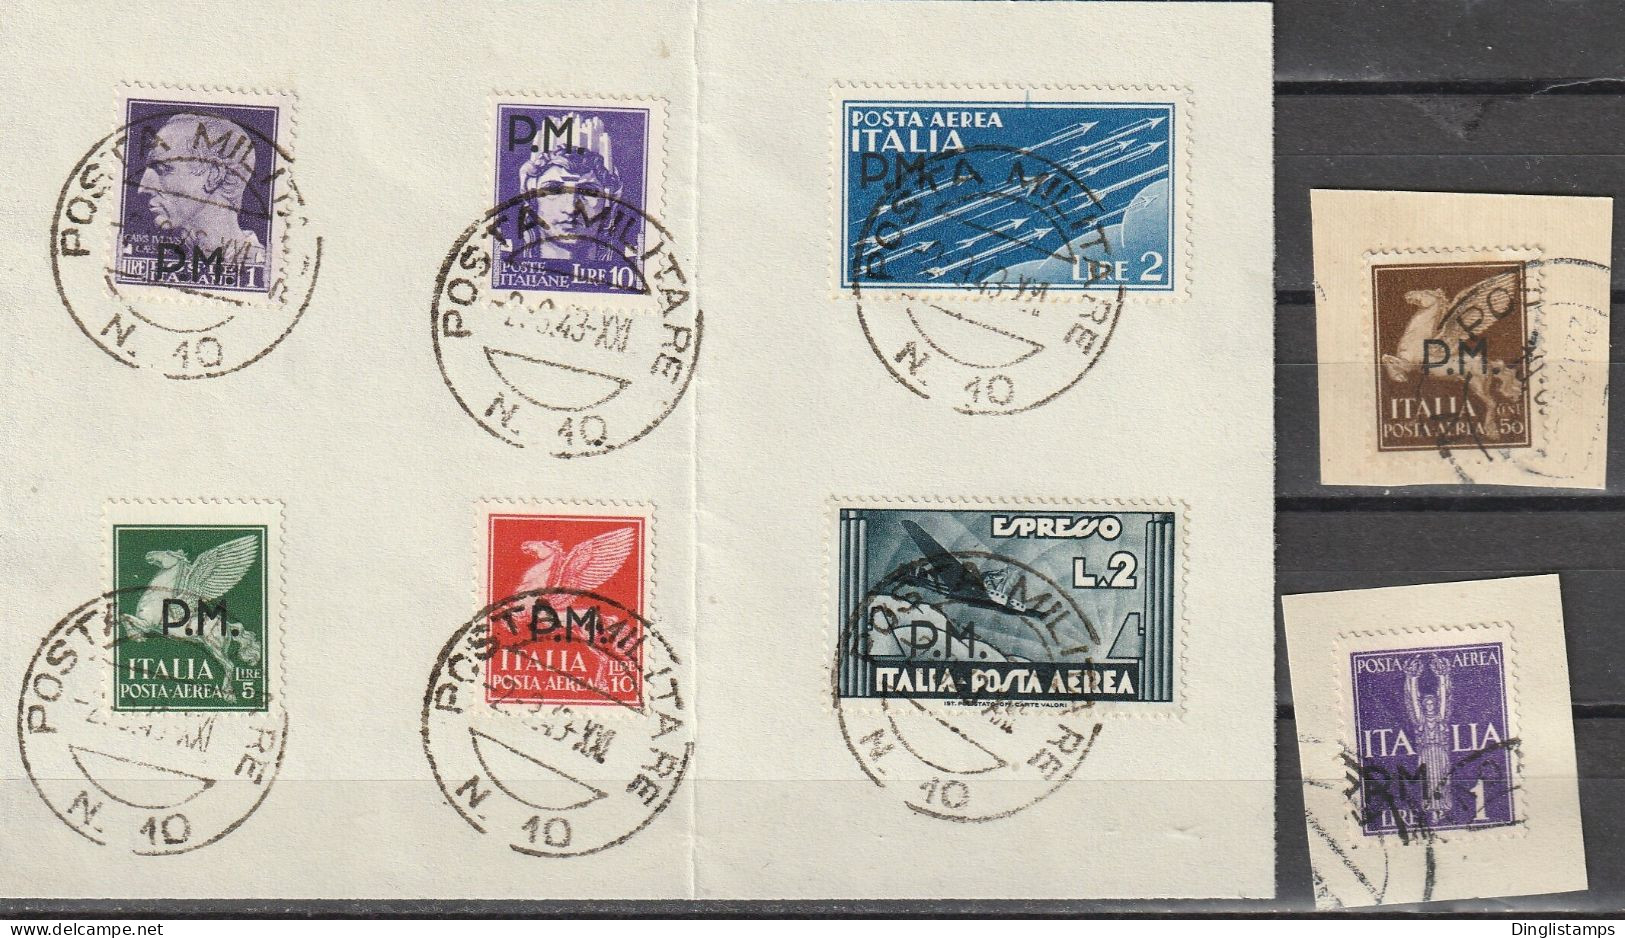 ITALY - 1942 Military Post With Overprint "PM" - Usados